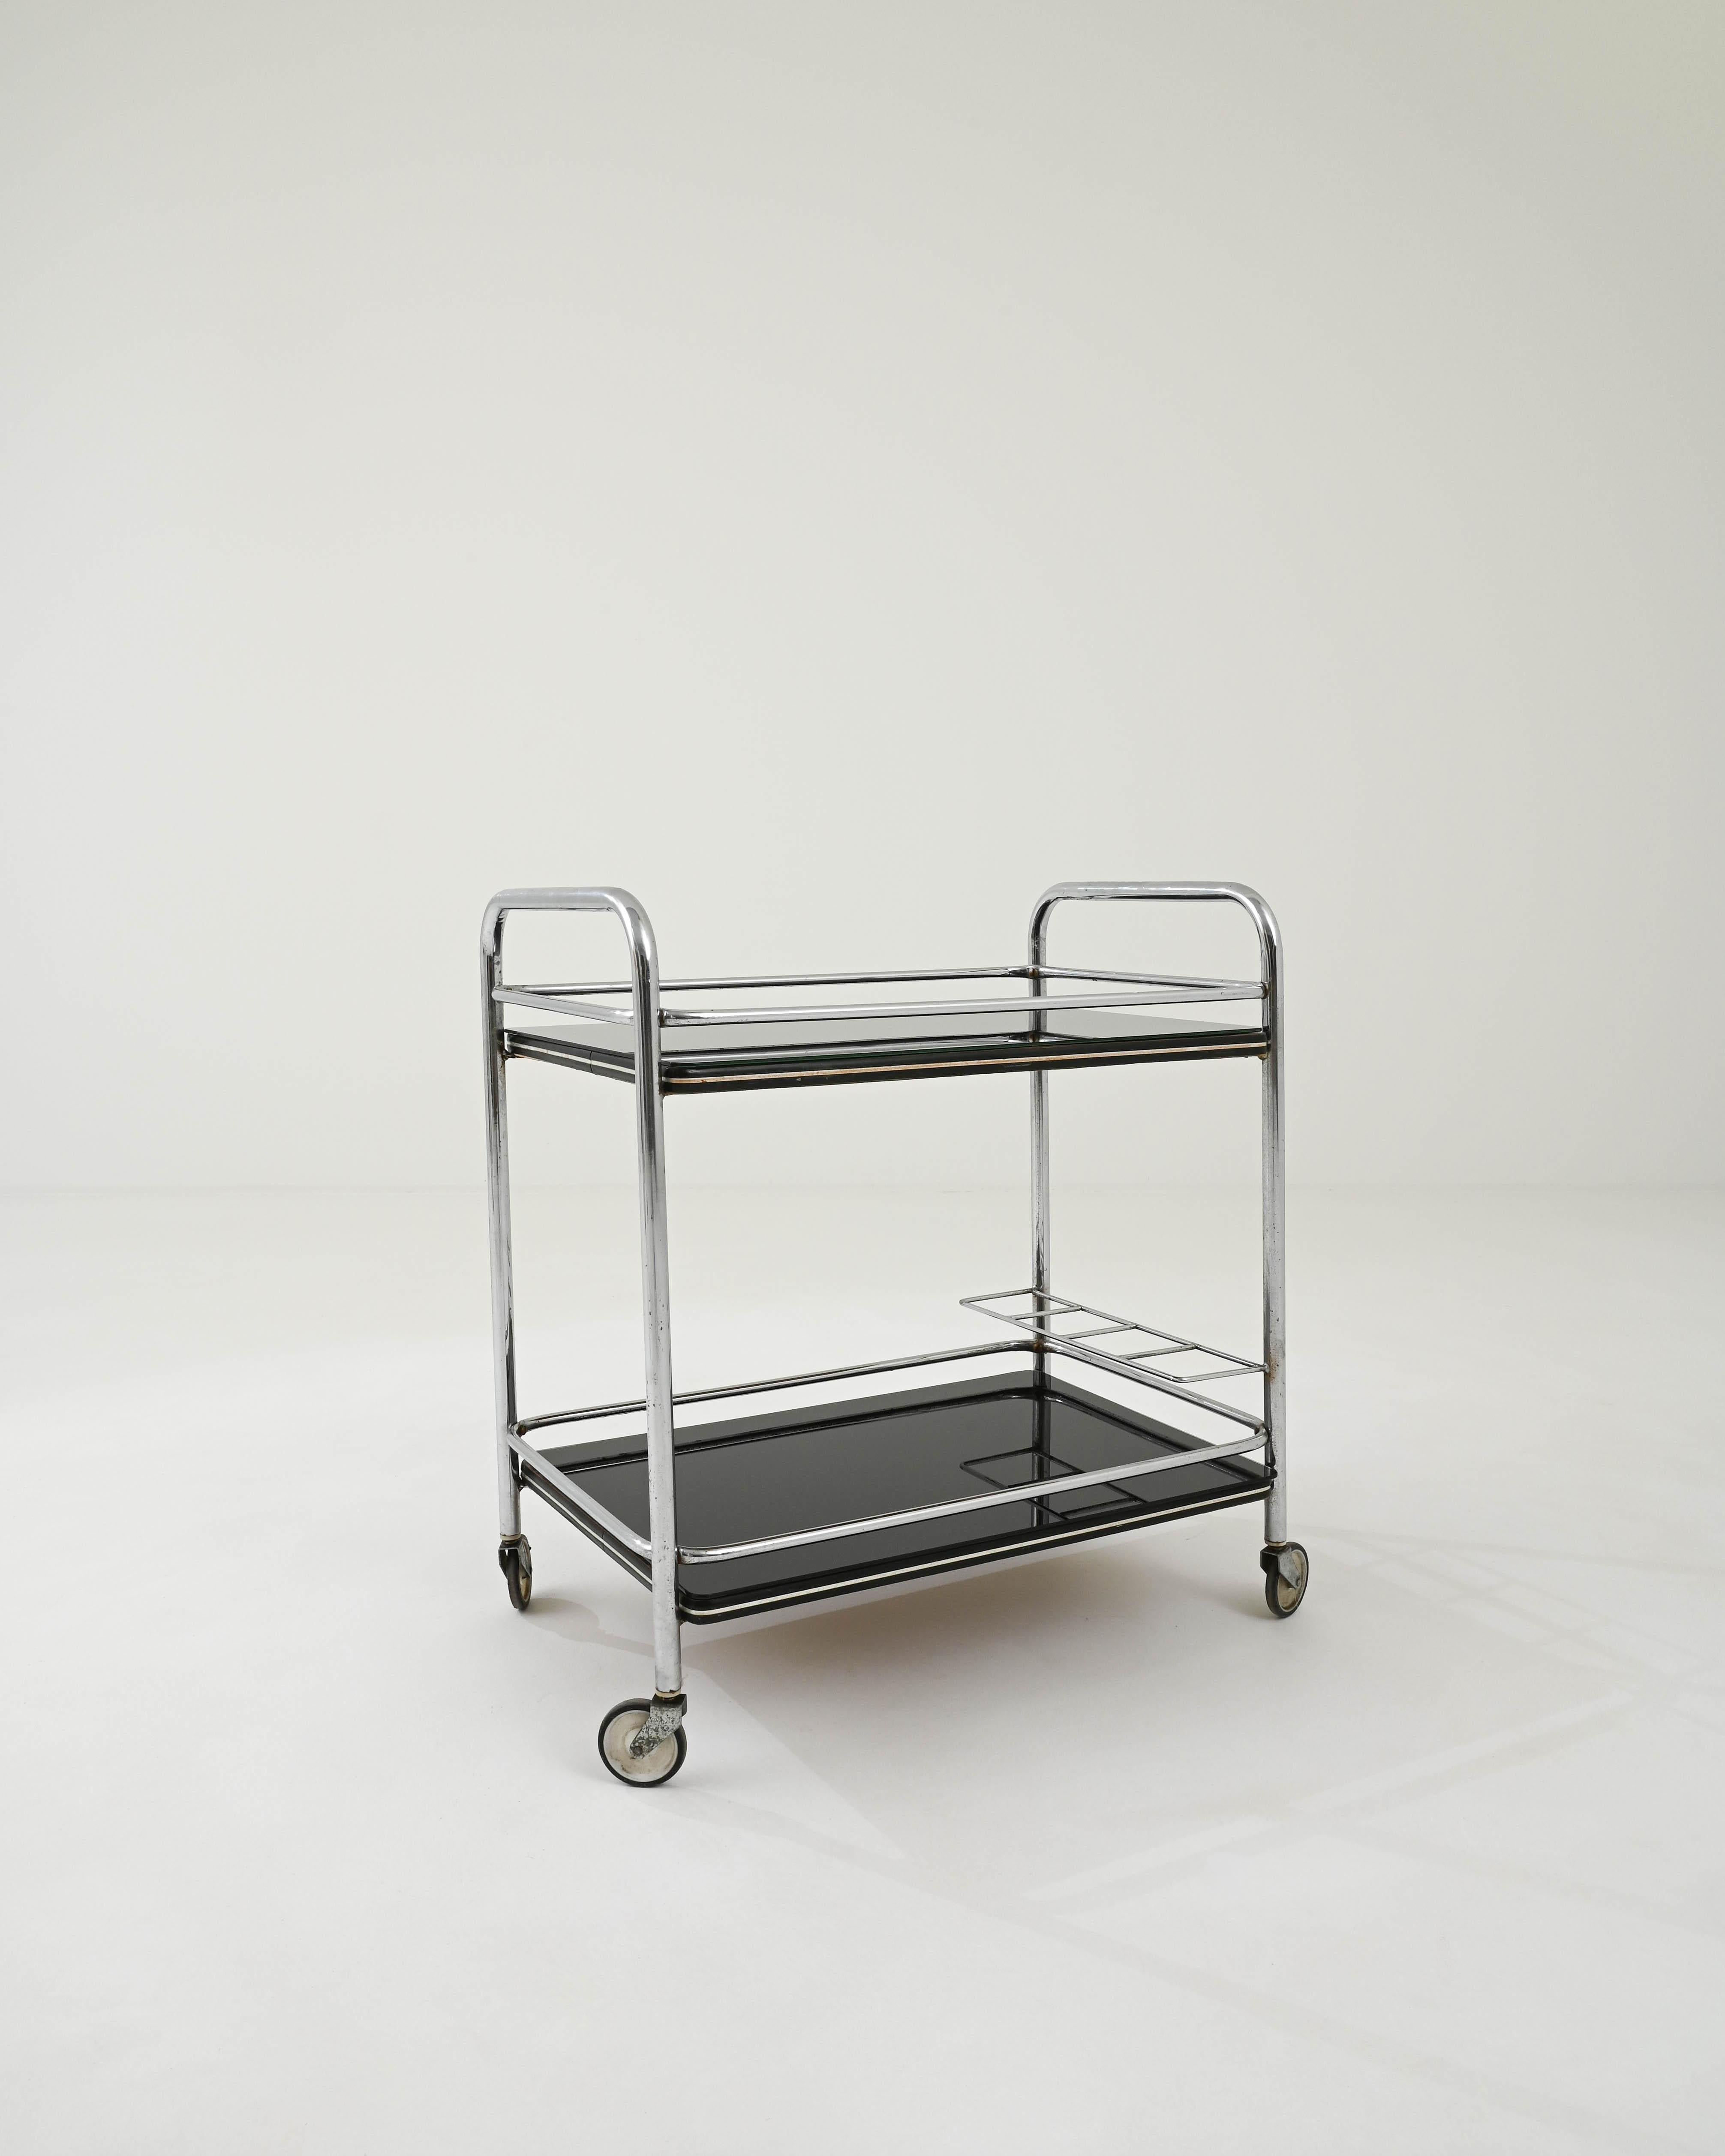 From France, circa 1960, a sleek rolling cart in modern style. Made from tubular steel and glass, this cart utilizes clean and modern materials, with an equally crisp composition. Straight lines and rounded edges give a proper geometric appearance